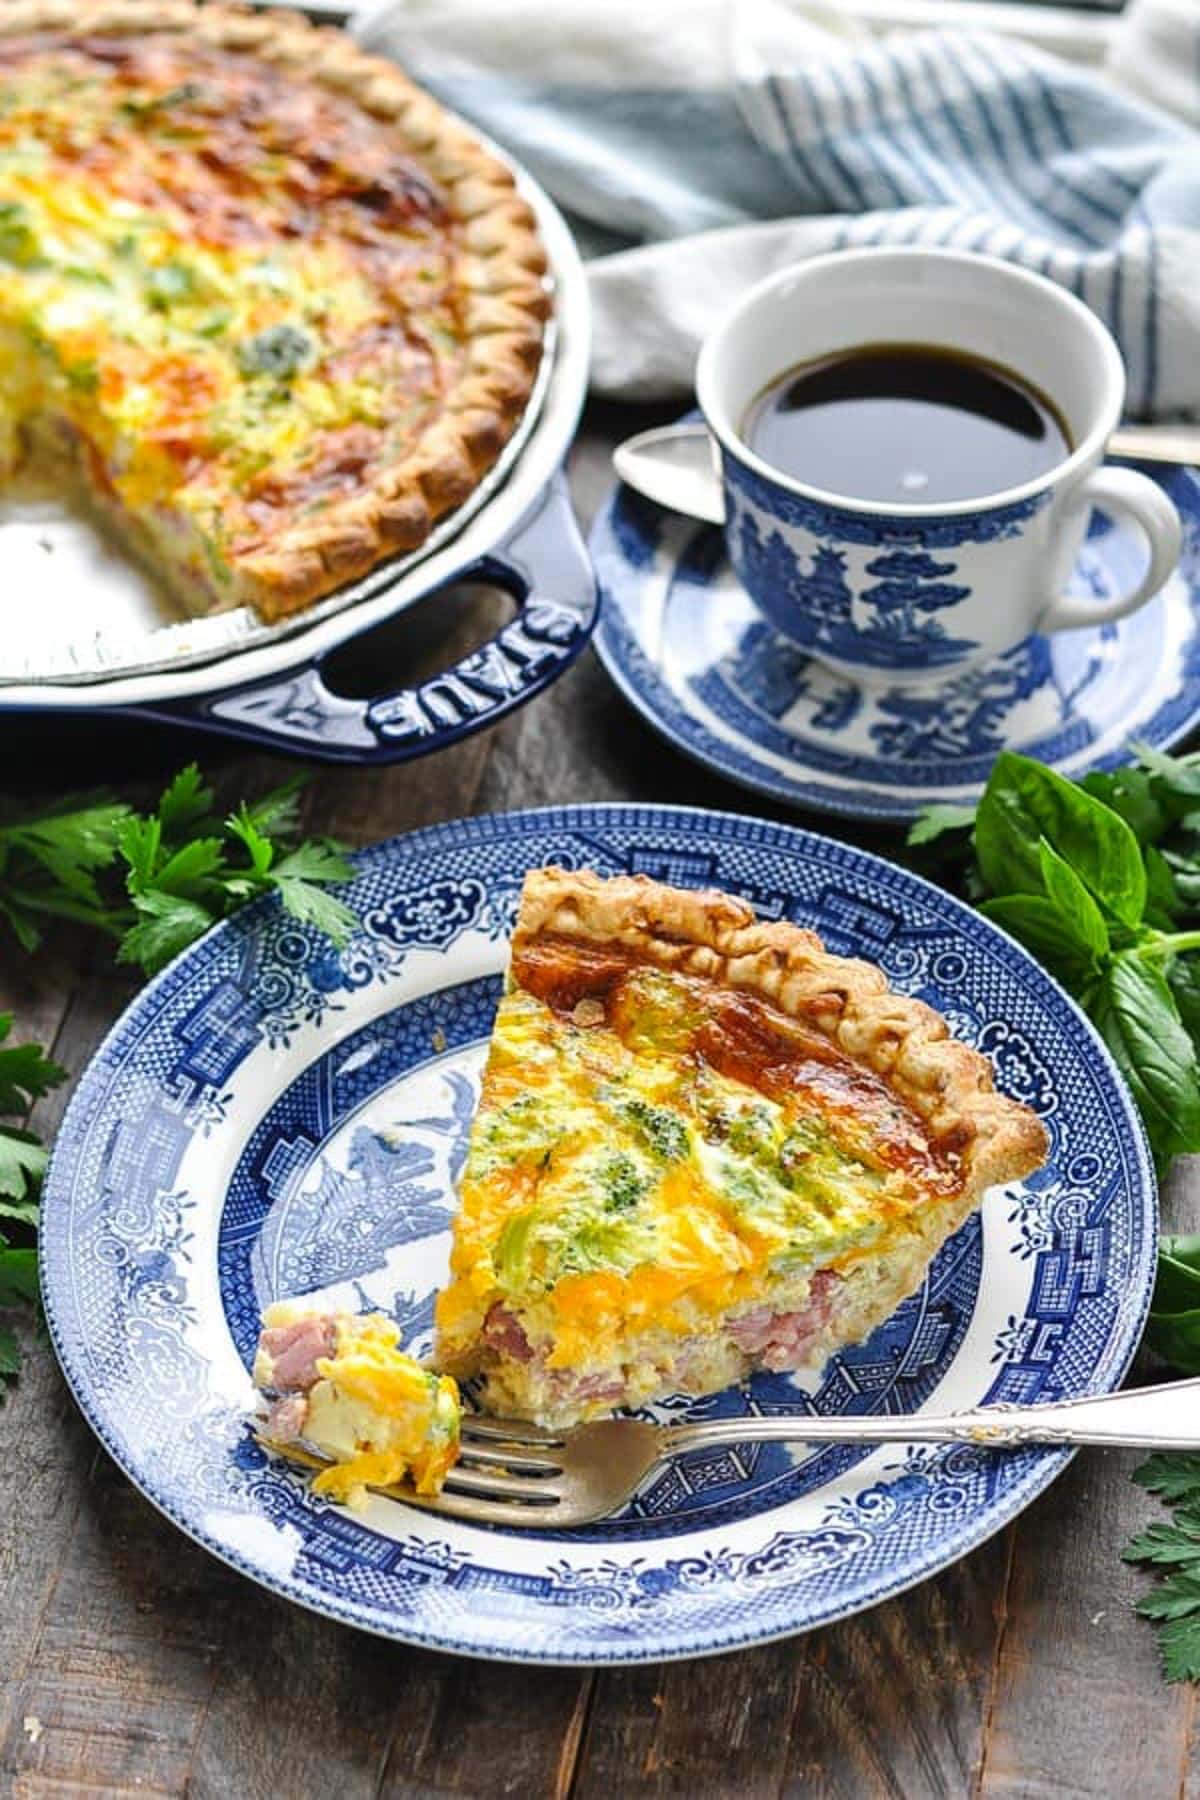 Table with a ham and broccoli quiche and fresh herbs.